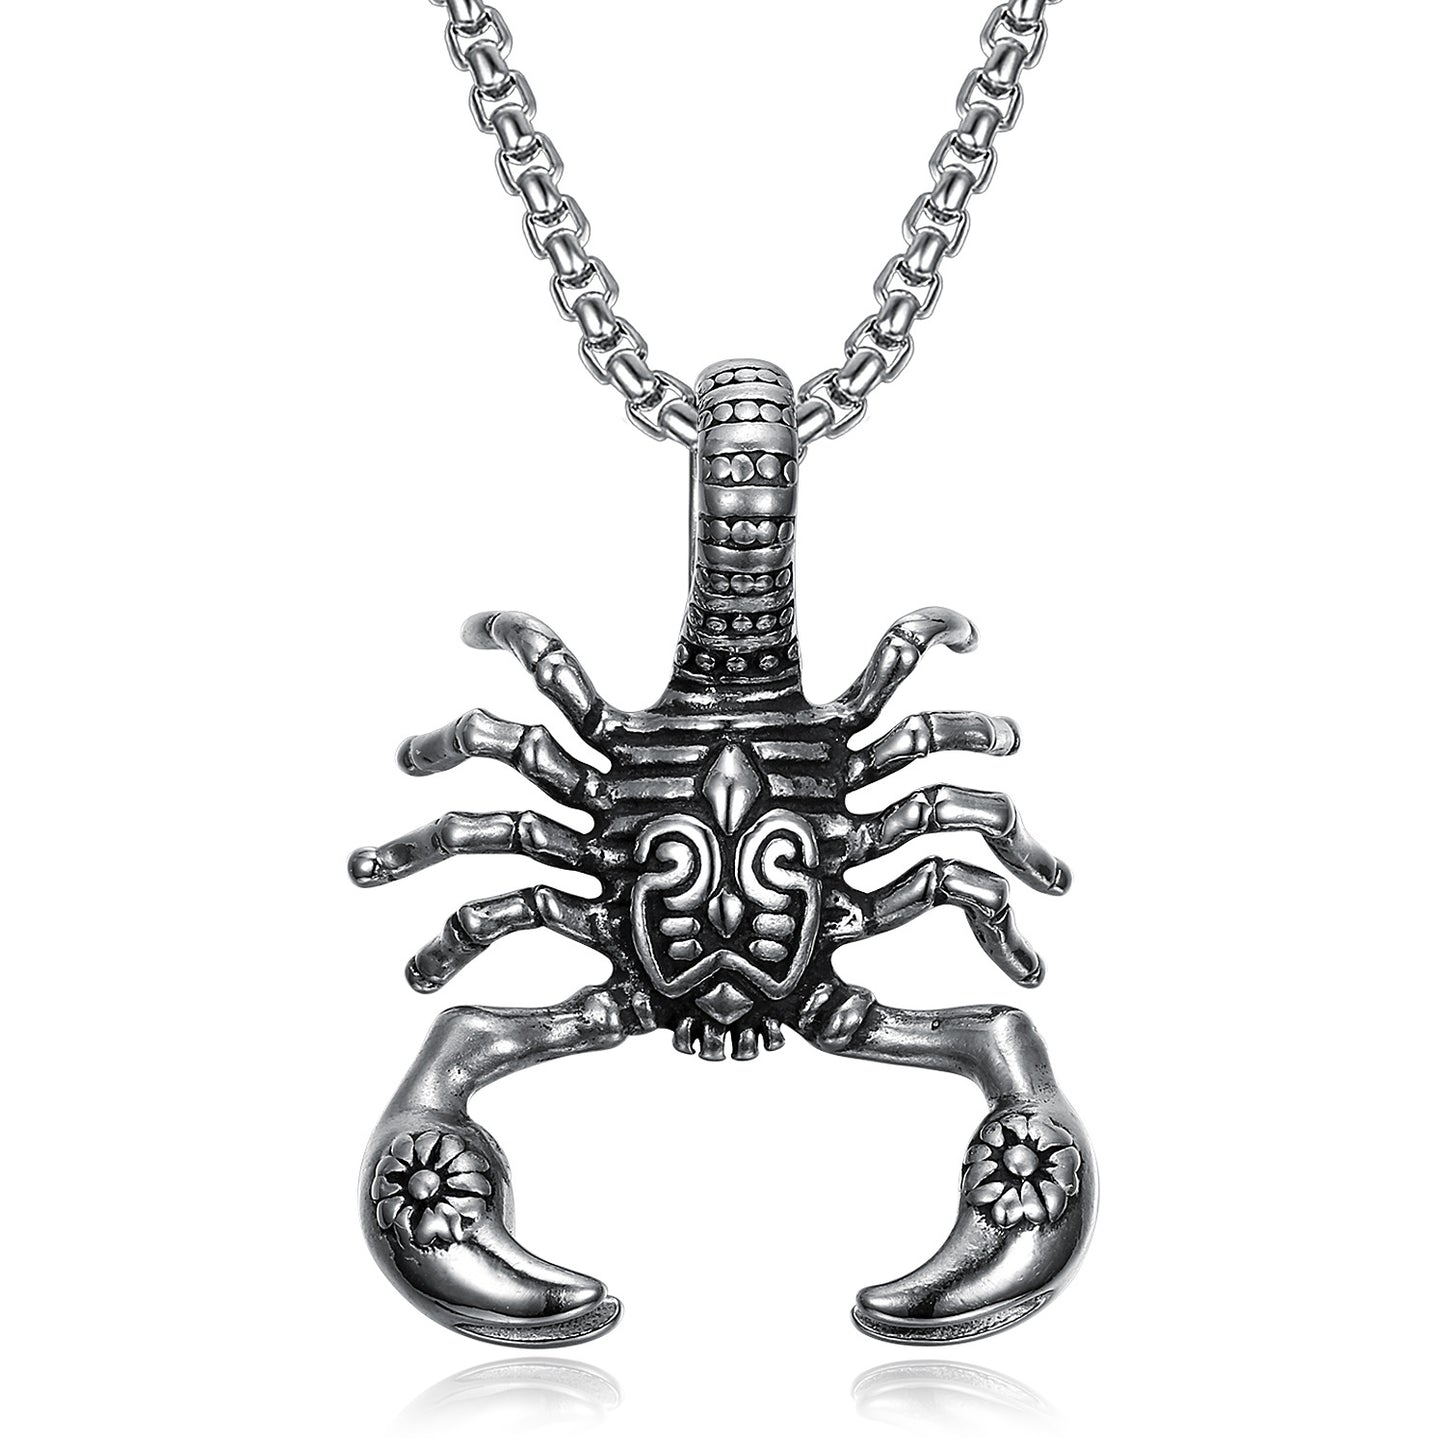 Gothic Vintage Stainless Steel Scorpion Pendant Necklace.